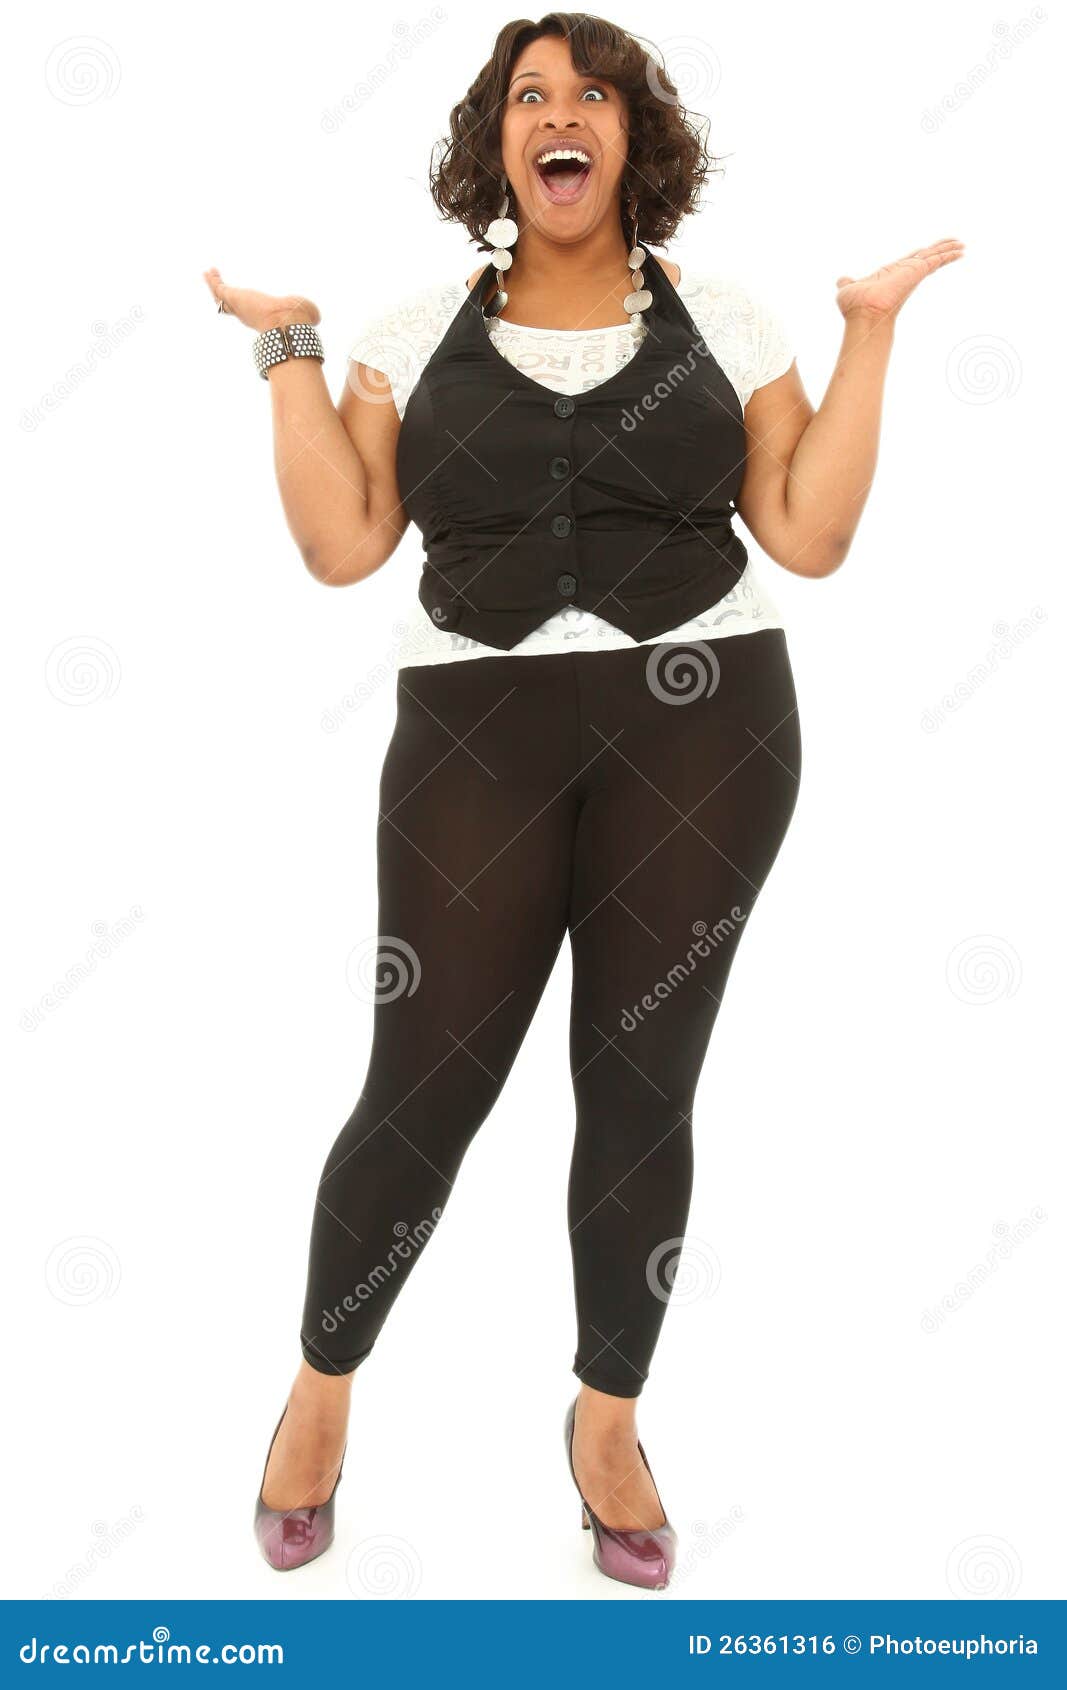 124 Plus Sized African American Woman Stock Photos - Free